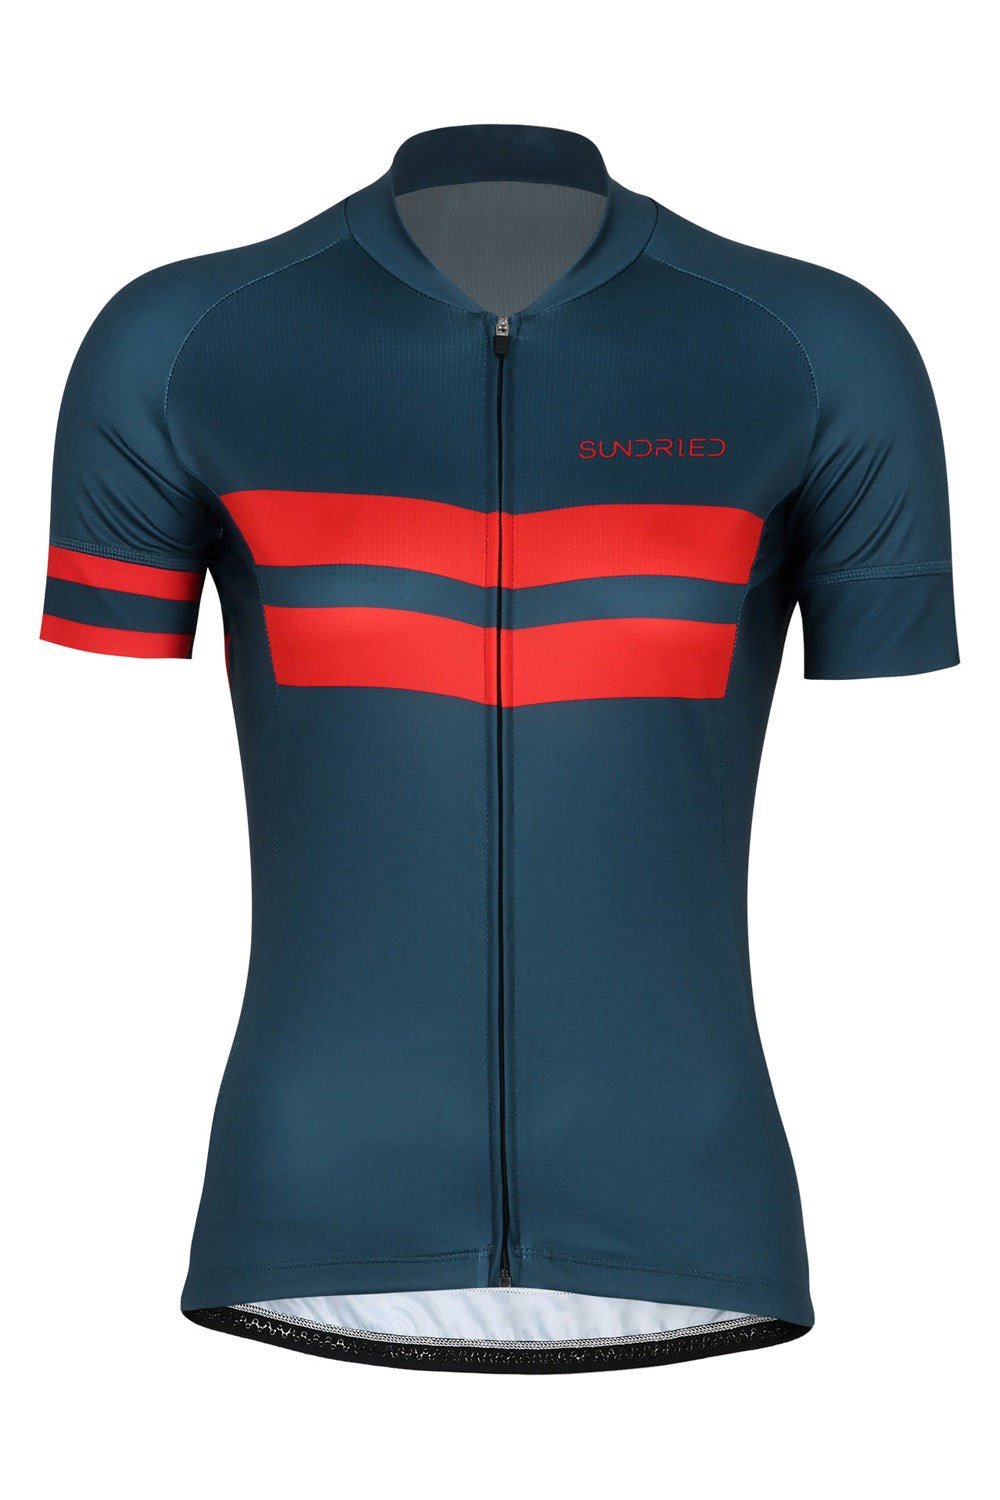 Endo Womens Cycle Jersey -